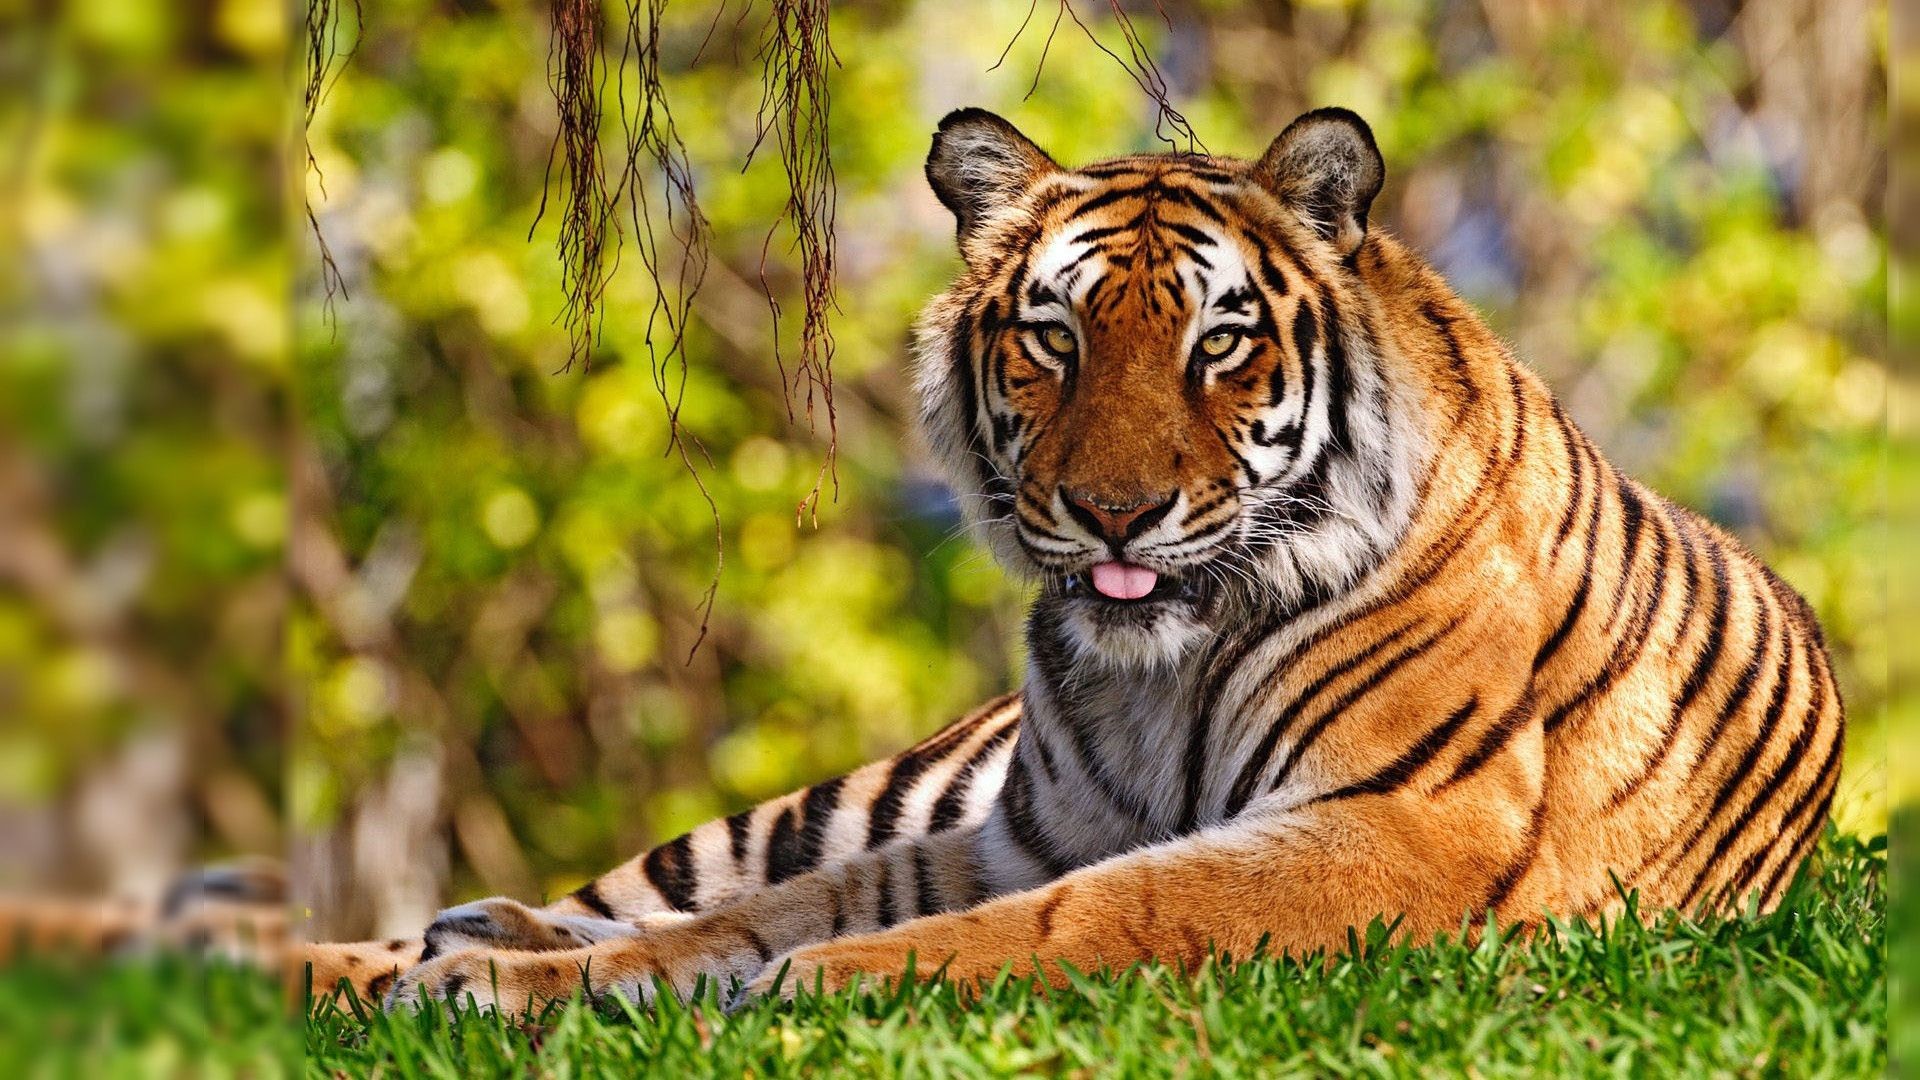 1920x1080 Tiger HD Wallpapers For Desktop Wallpapers) – Adorable Wallpapers